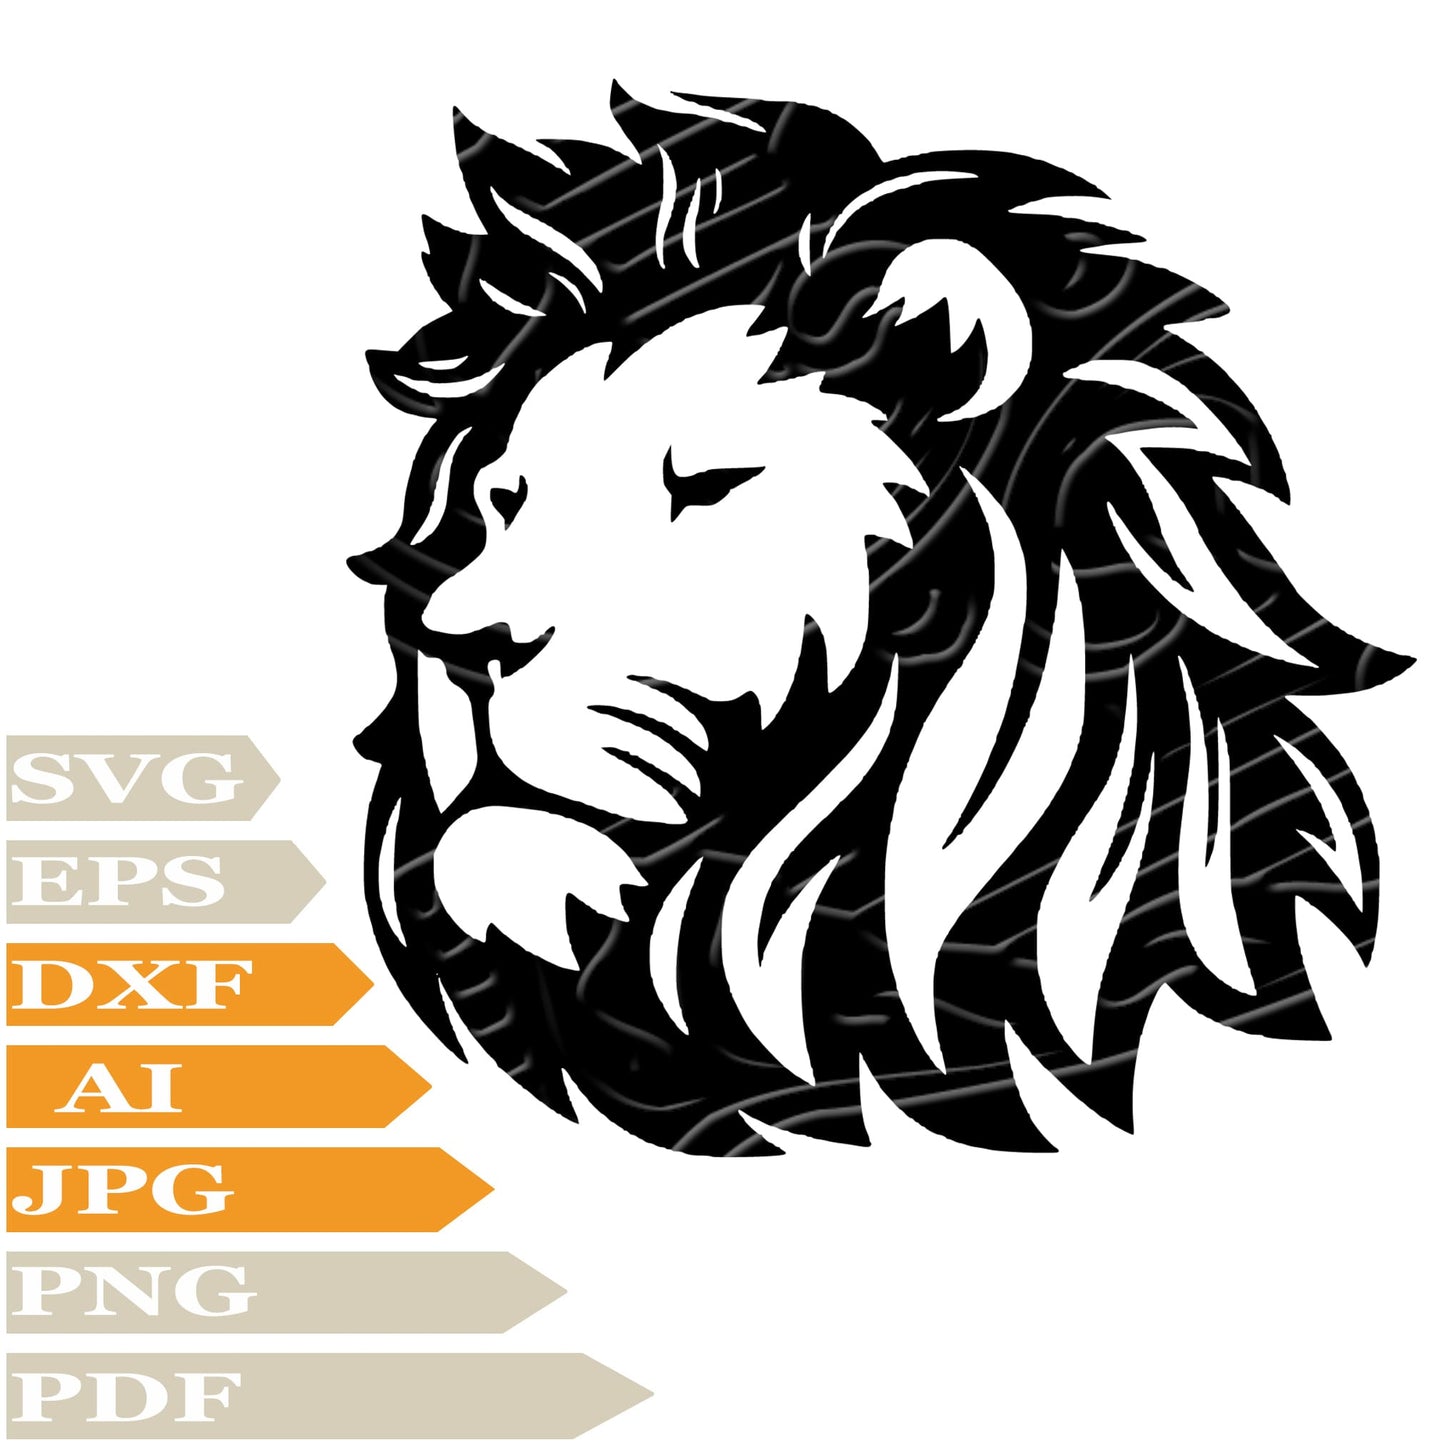 Lion SVG-Lion Head Personalized SVG-Wild Lion Drawing SVG-Lion King Animals Vector ClipArt's-SVG Cut Files-Illustration-PNG-Decal-Circuit-Digital Files-For Shirts-Silhouette